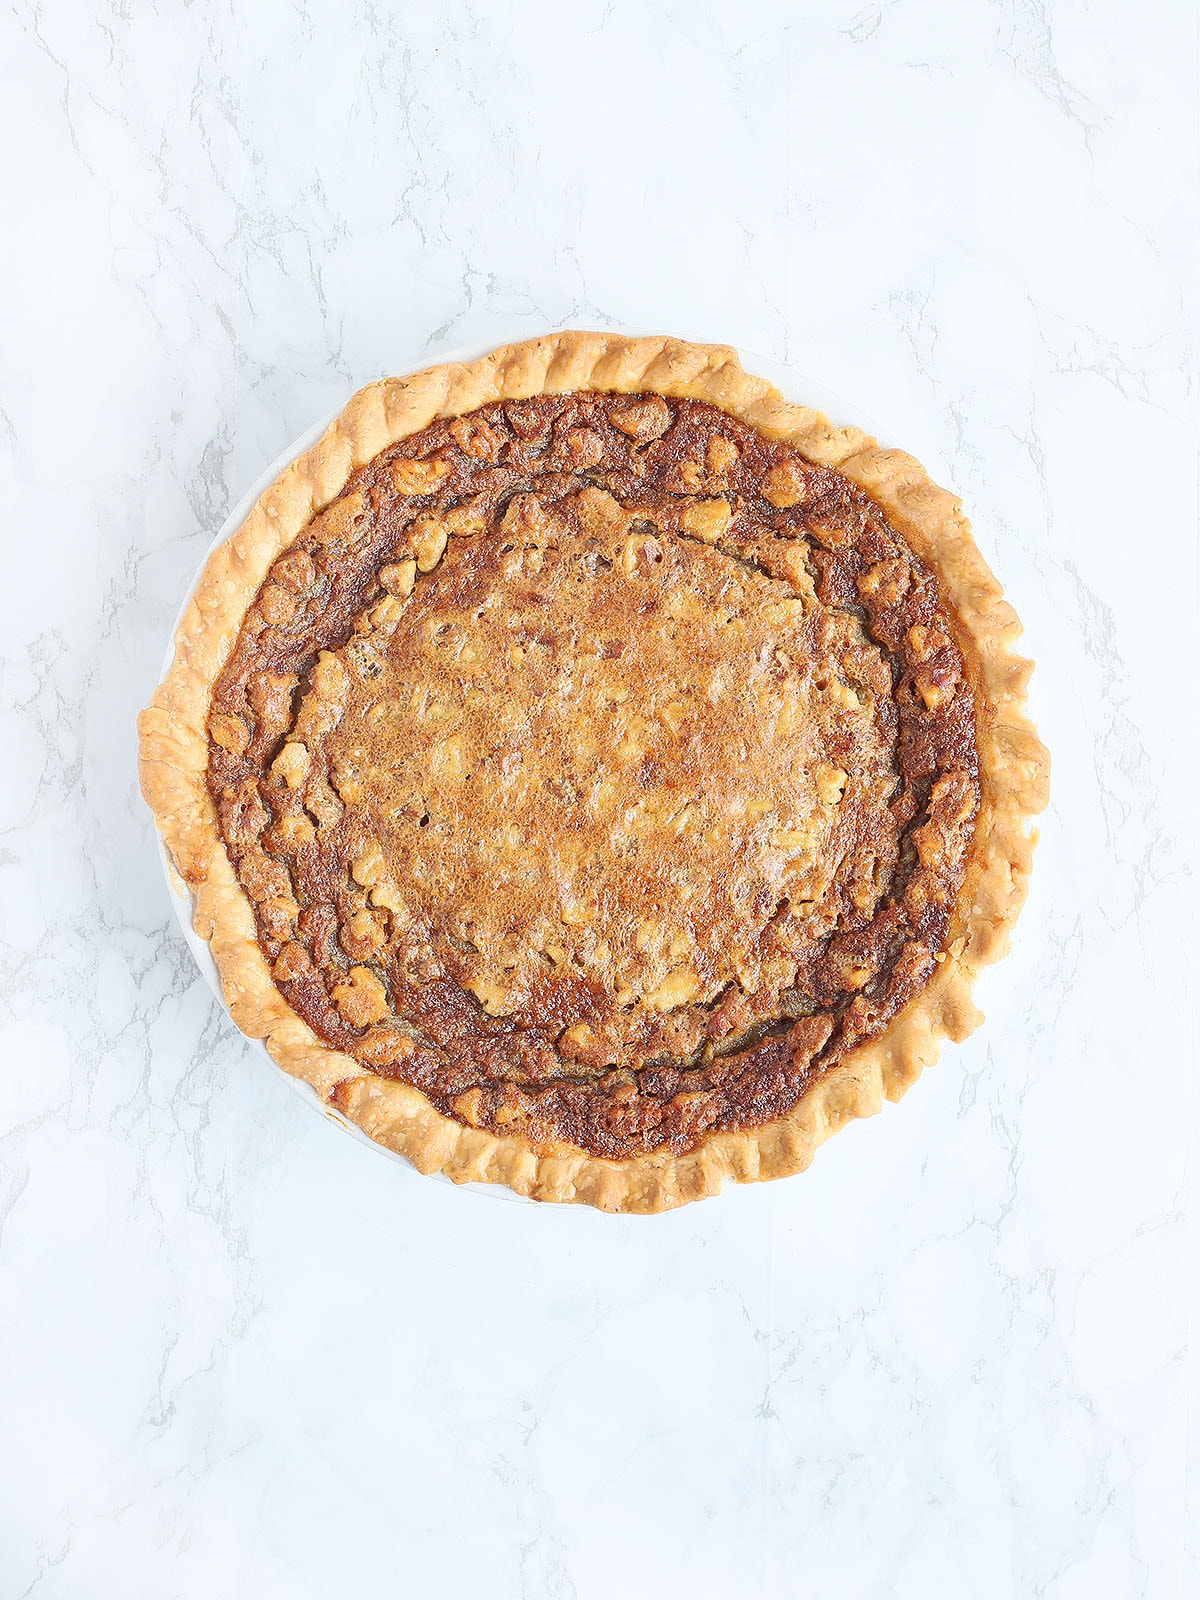 baked Kentucky Derby pie on a white marble background